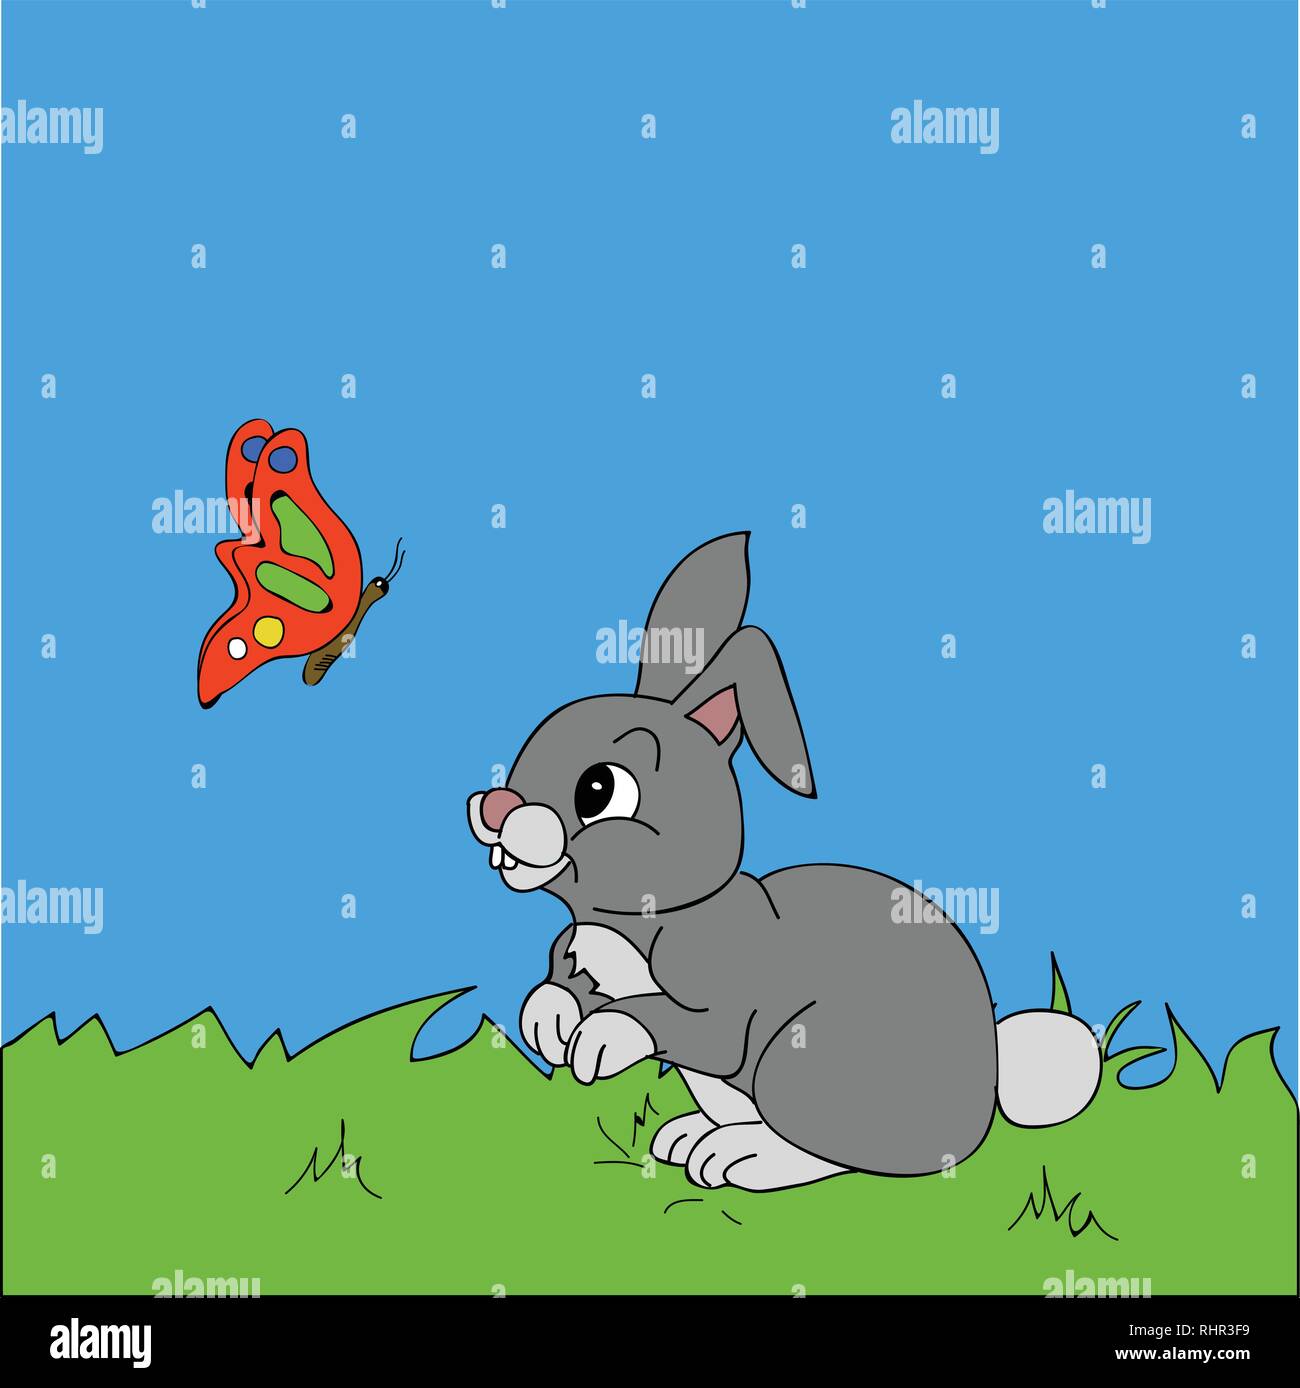 Hand Drawn Cute Rabbit and Butterfly cartoons style Over Grass and Sky Background Stock Vector